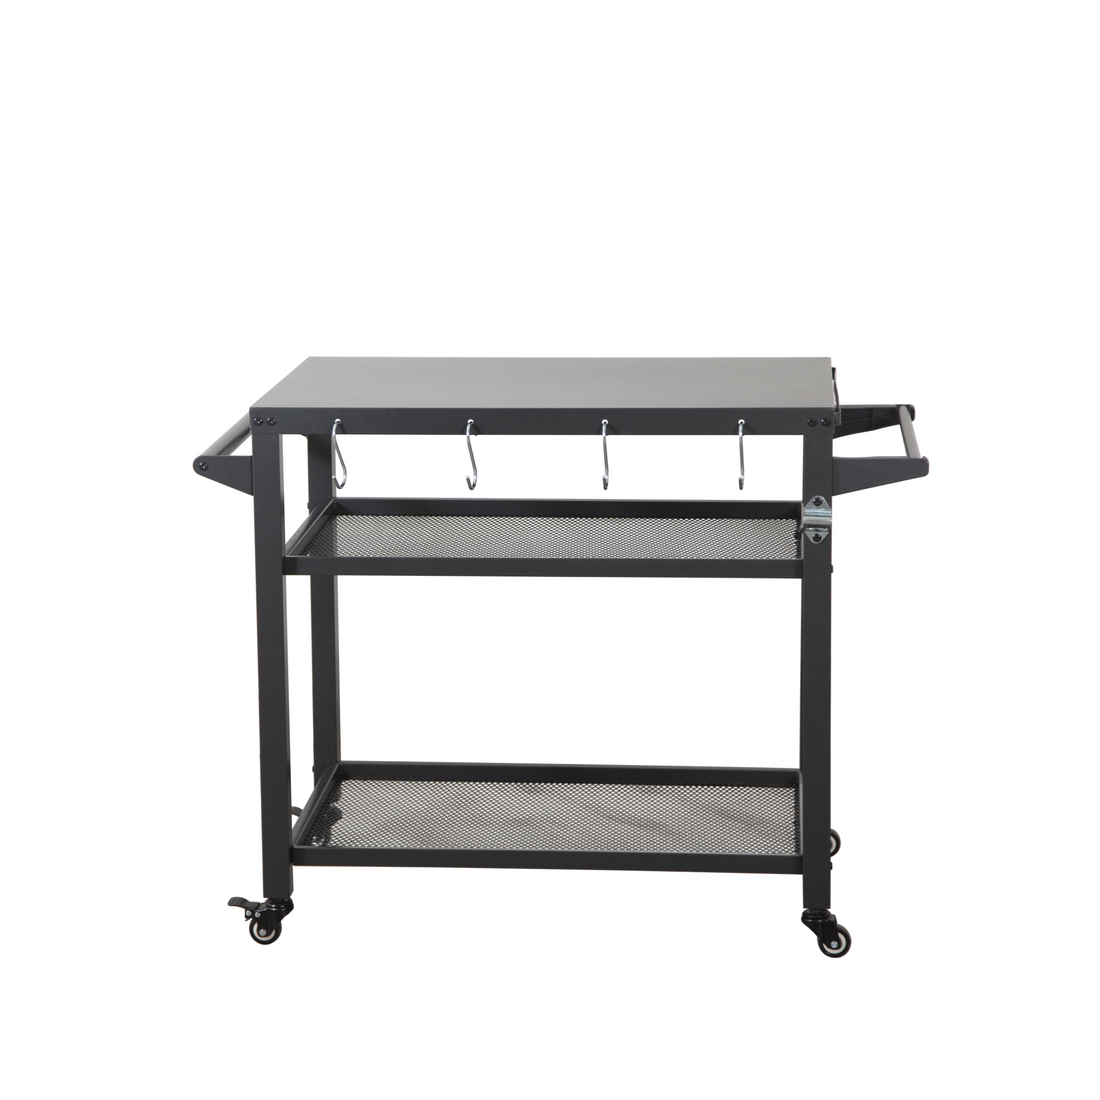 3 Shelf Outdoor Grill Table, Grill Cart Outdoor with grey-steel